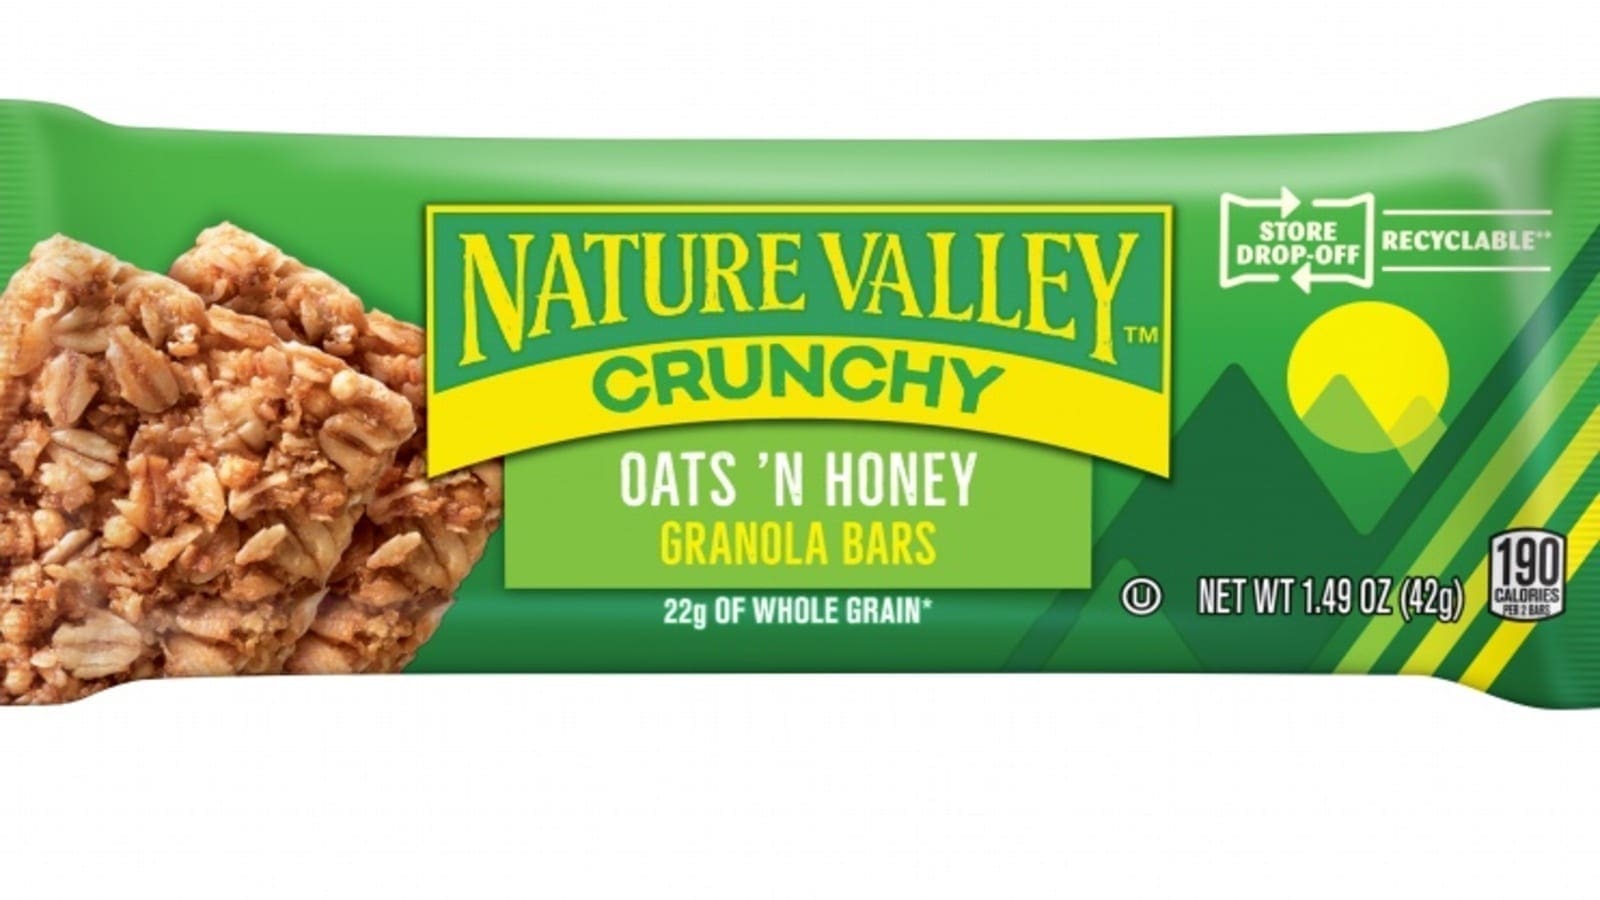 General Mills debuts Nature Valley granola bars in new recyclable wrappers